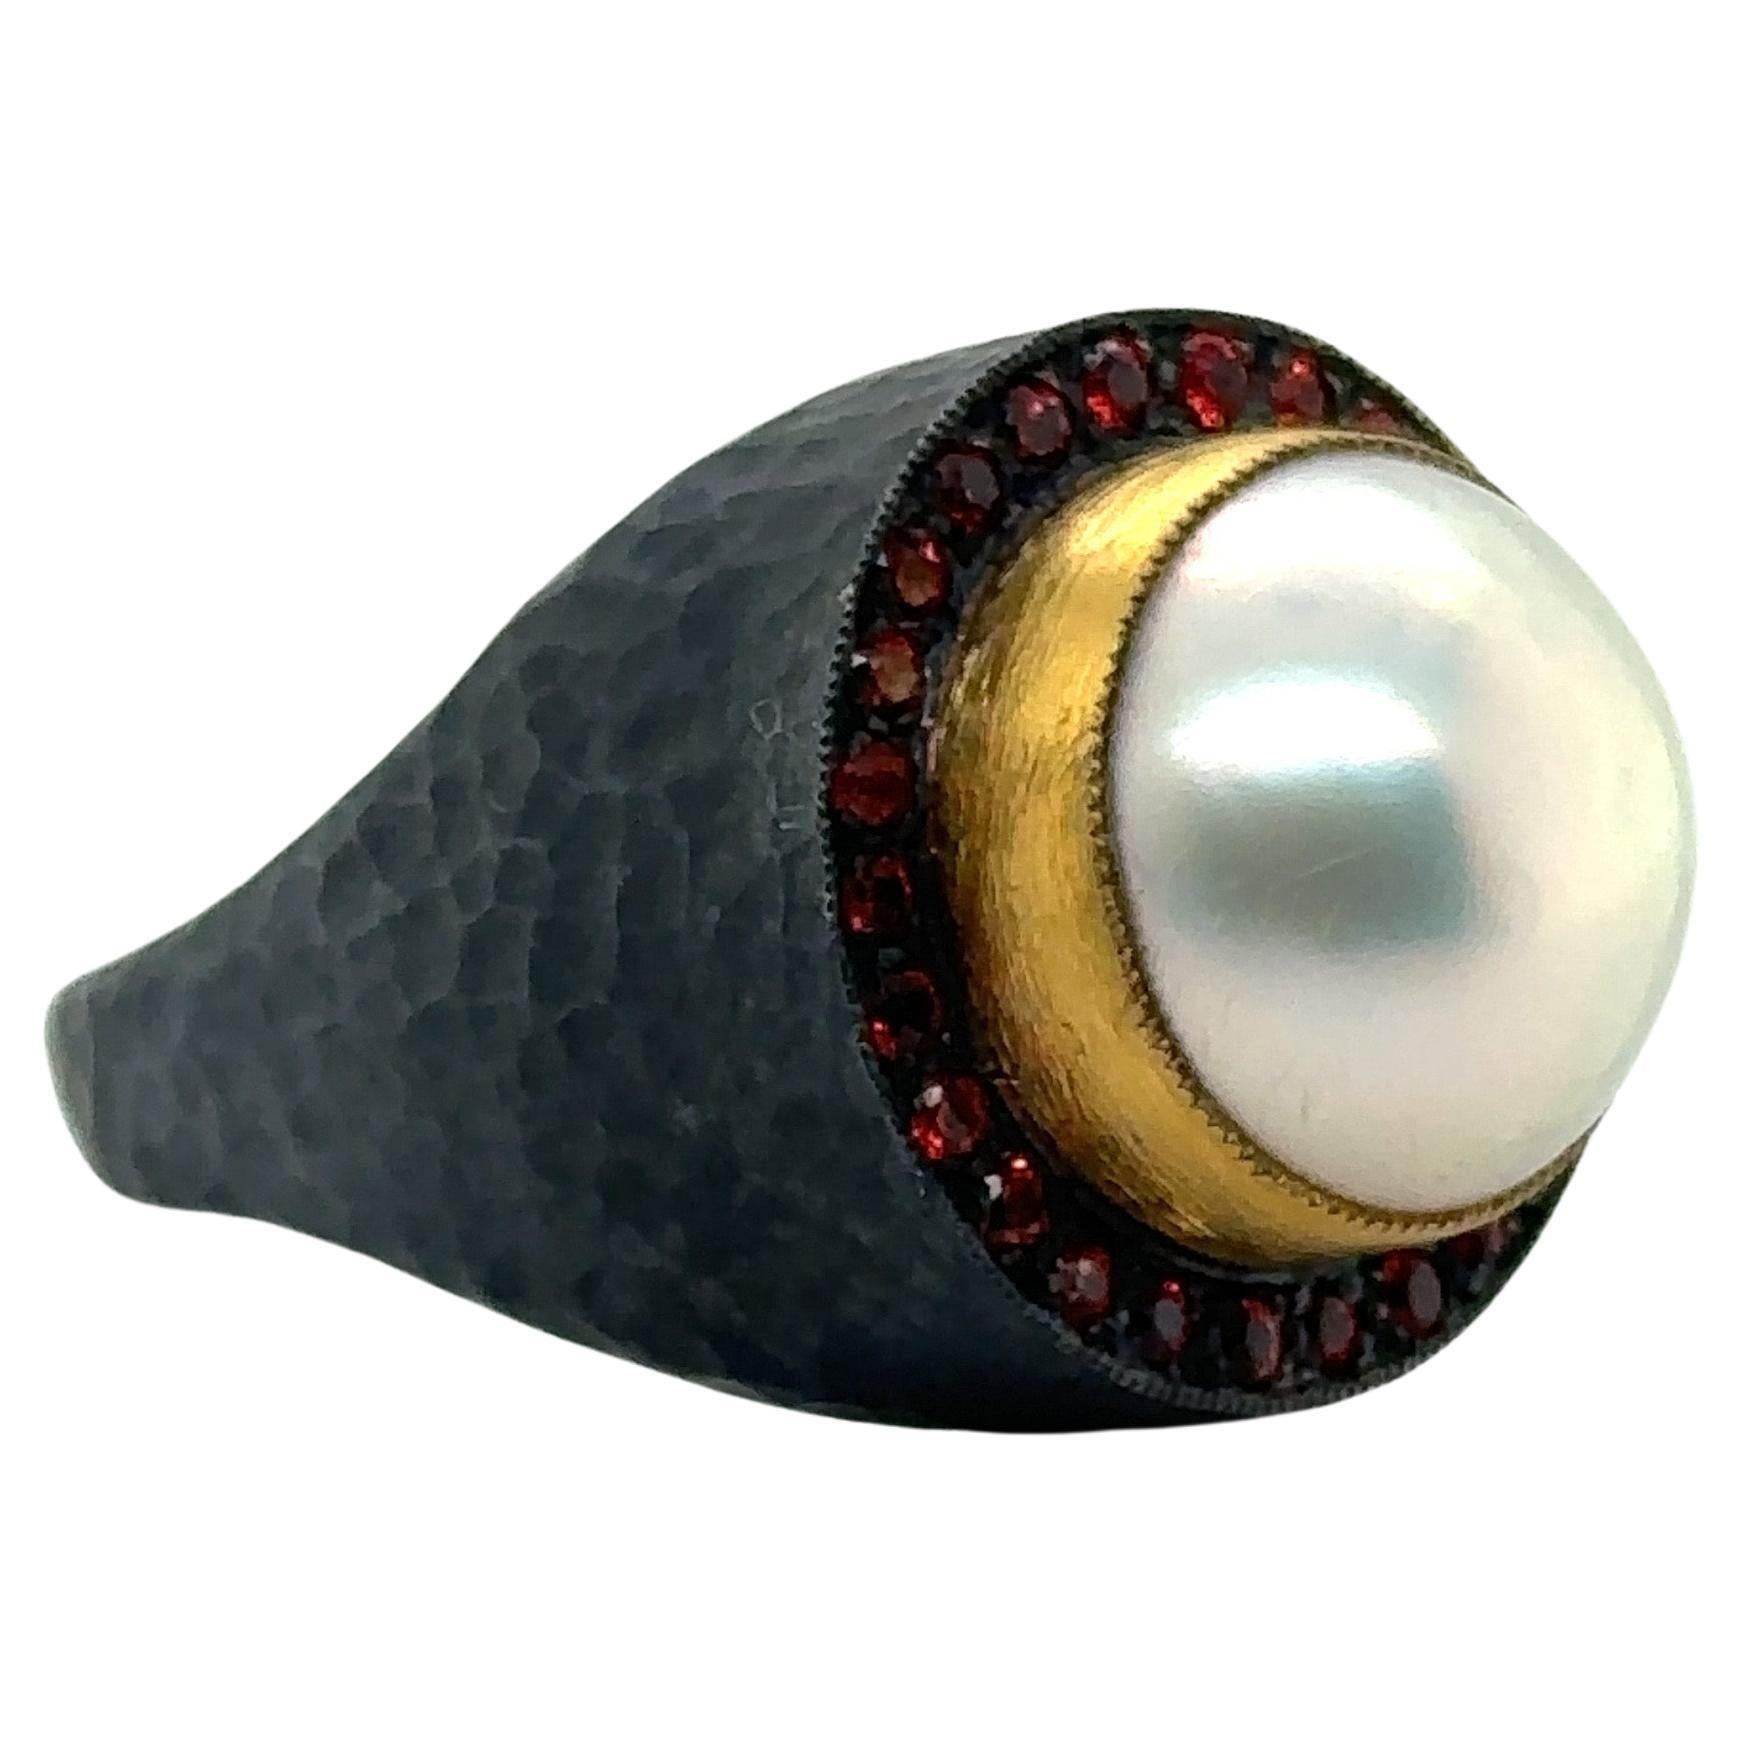 JAS-19-1971 - 24KT GOLD/SS 13MM MABE RING with 0.60CT RED SAPPHIRES